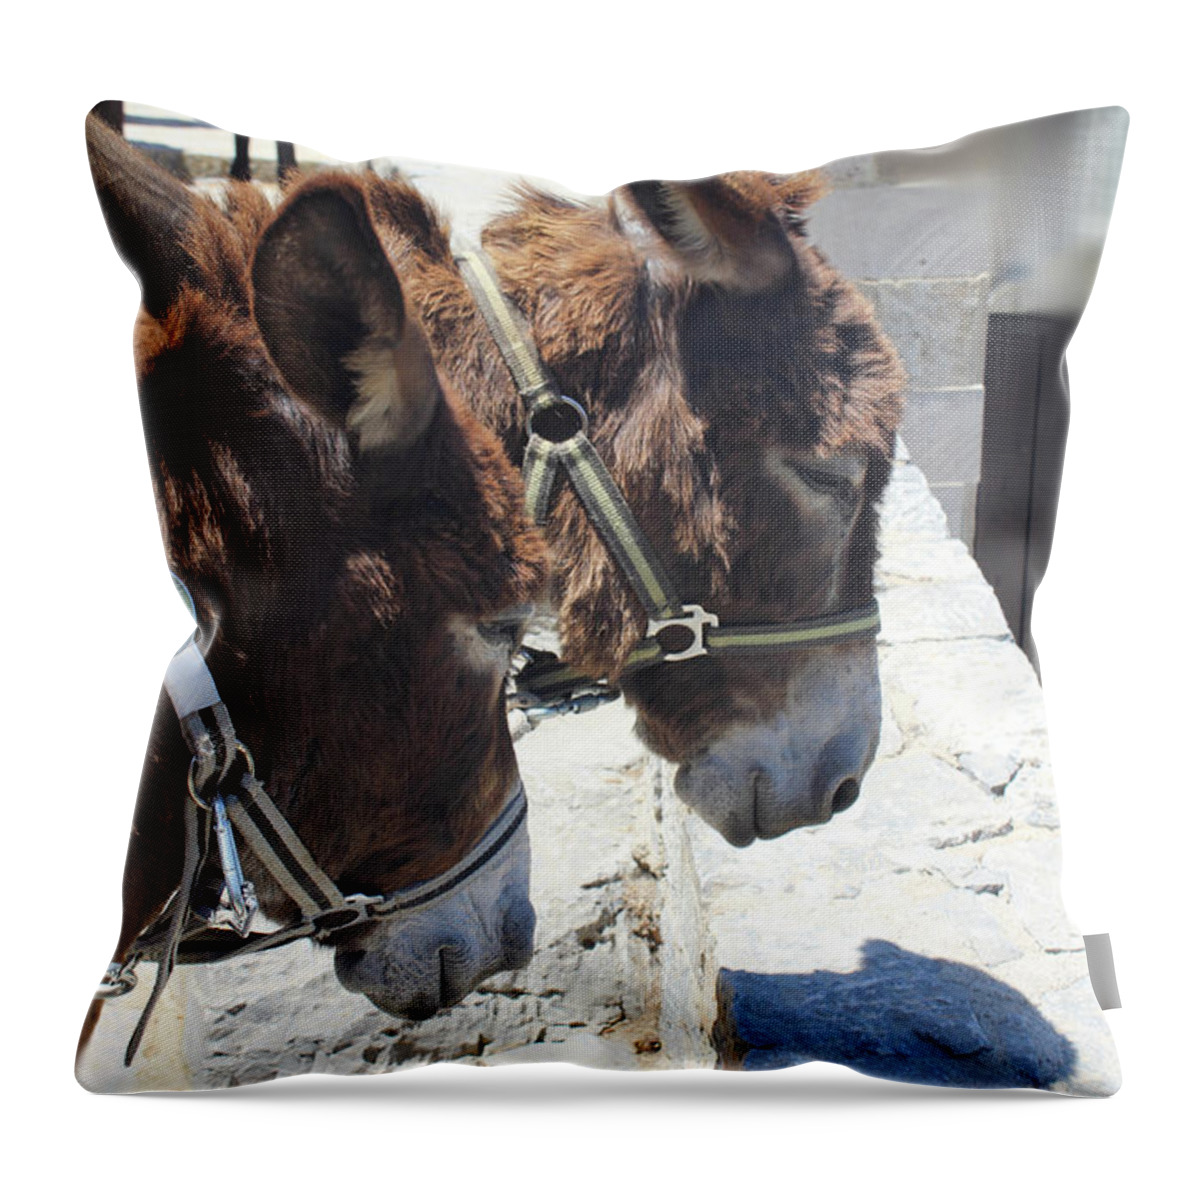 Greece Throw Pillow featuring the photograph Greece's Donkeys by Donna L Munro